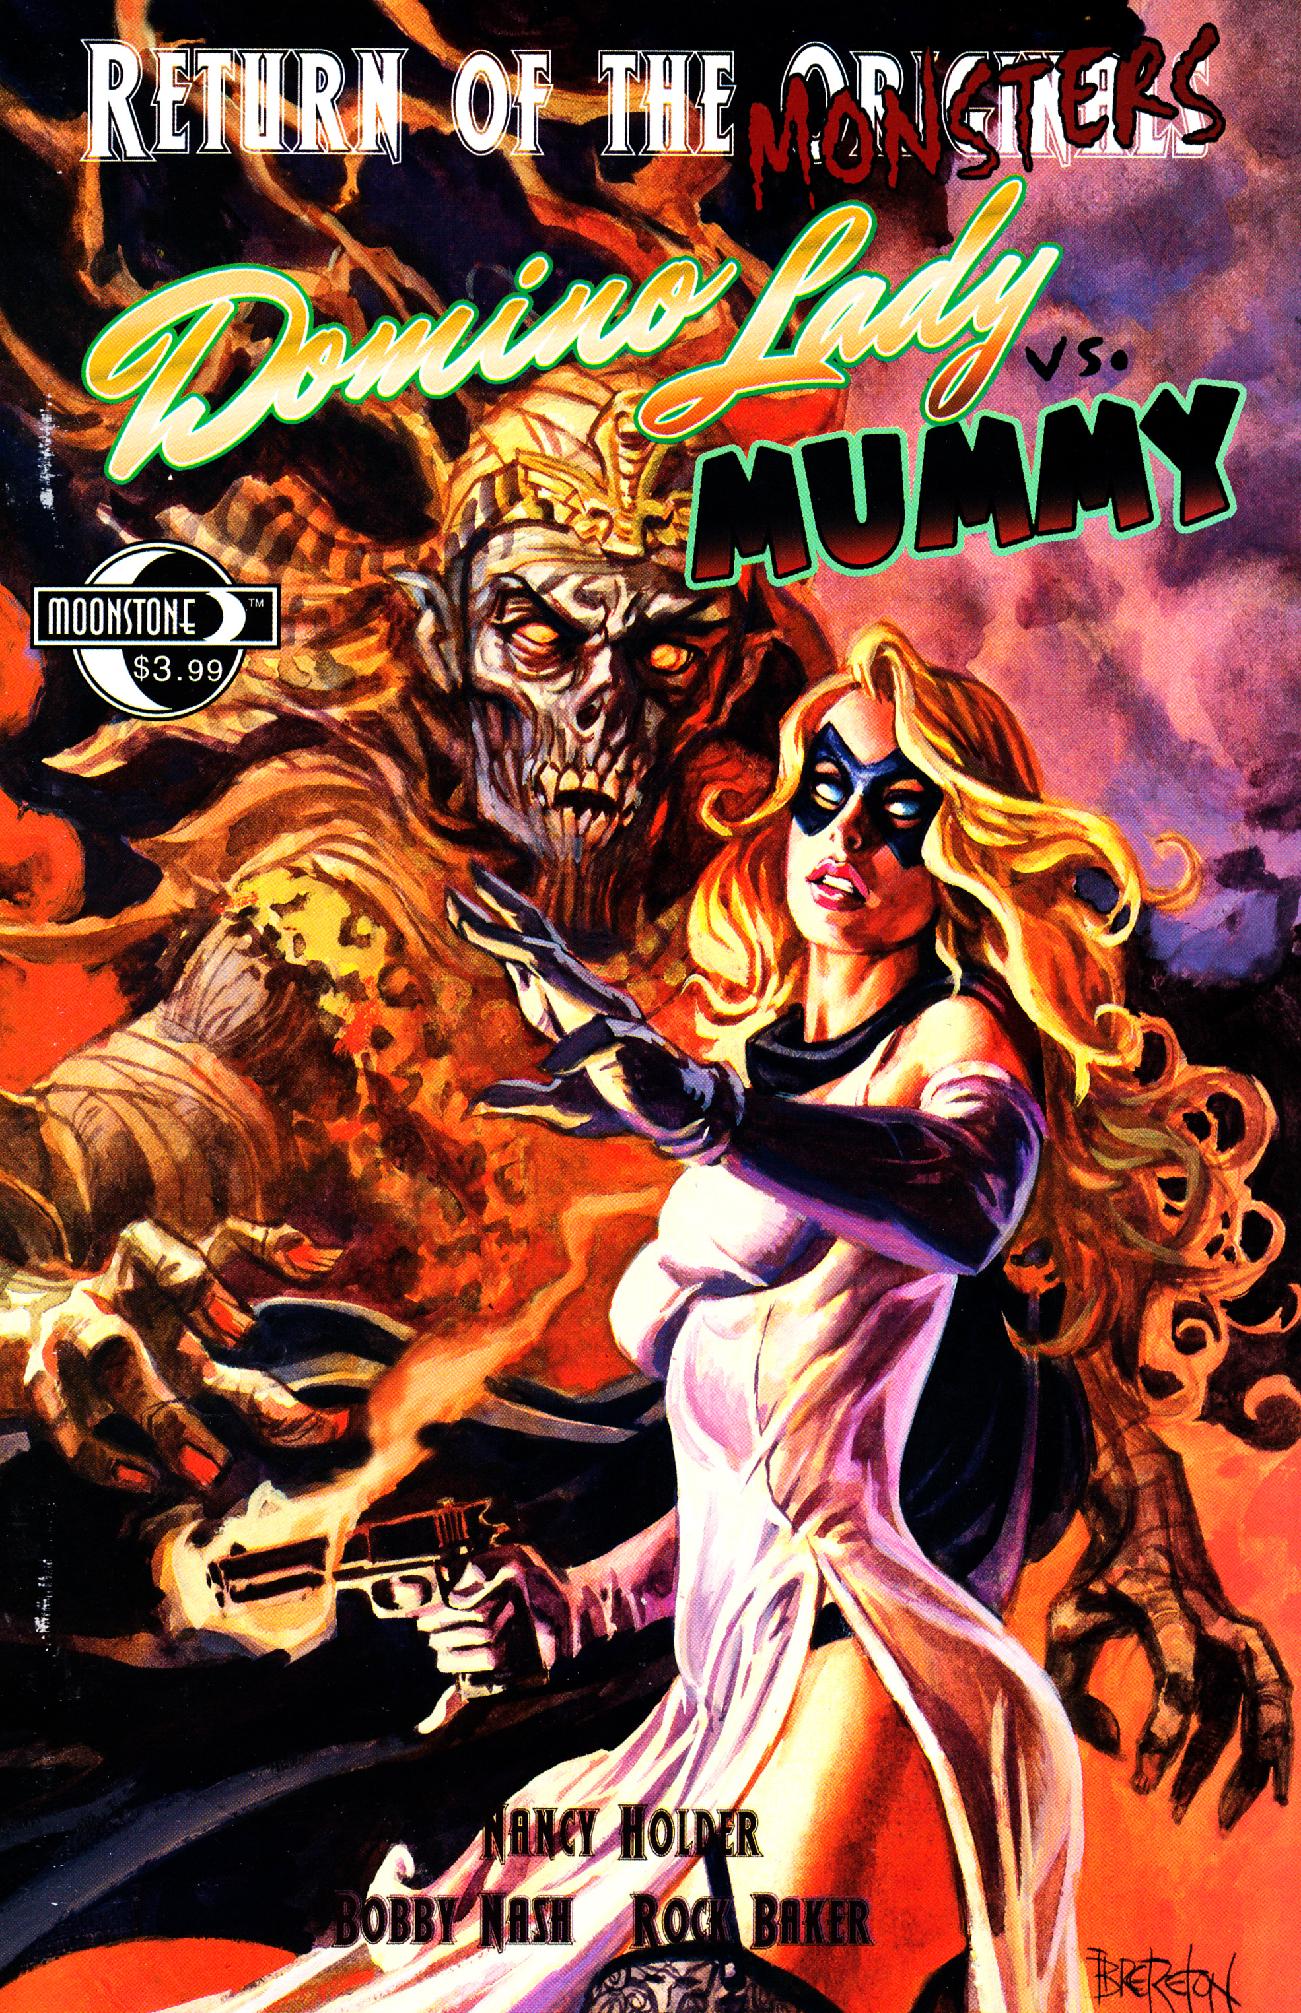 Read online Return of the Monsters: Domino Lady vs Mummy comic -  Issue # Full - 1